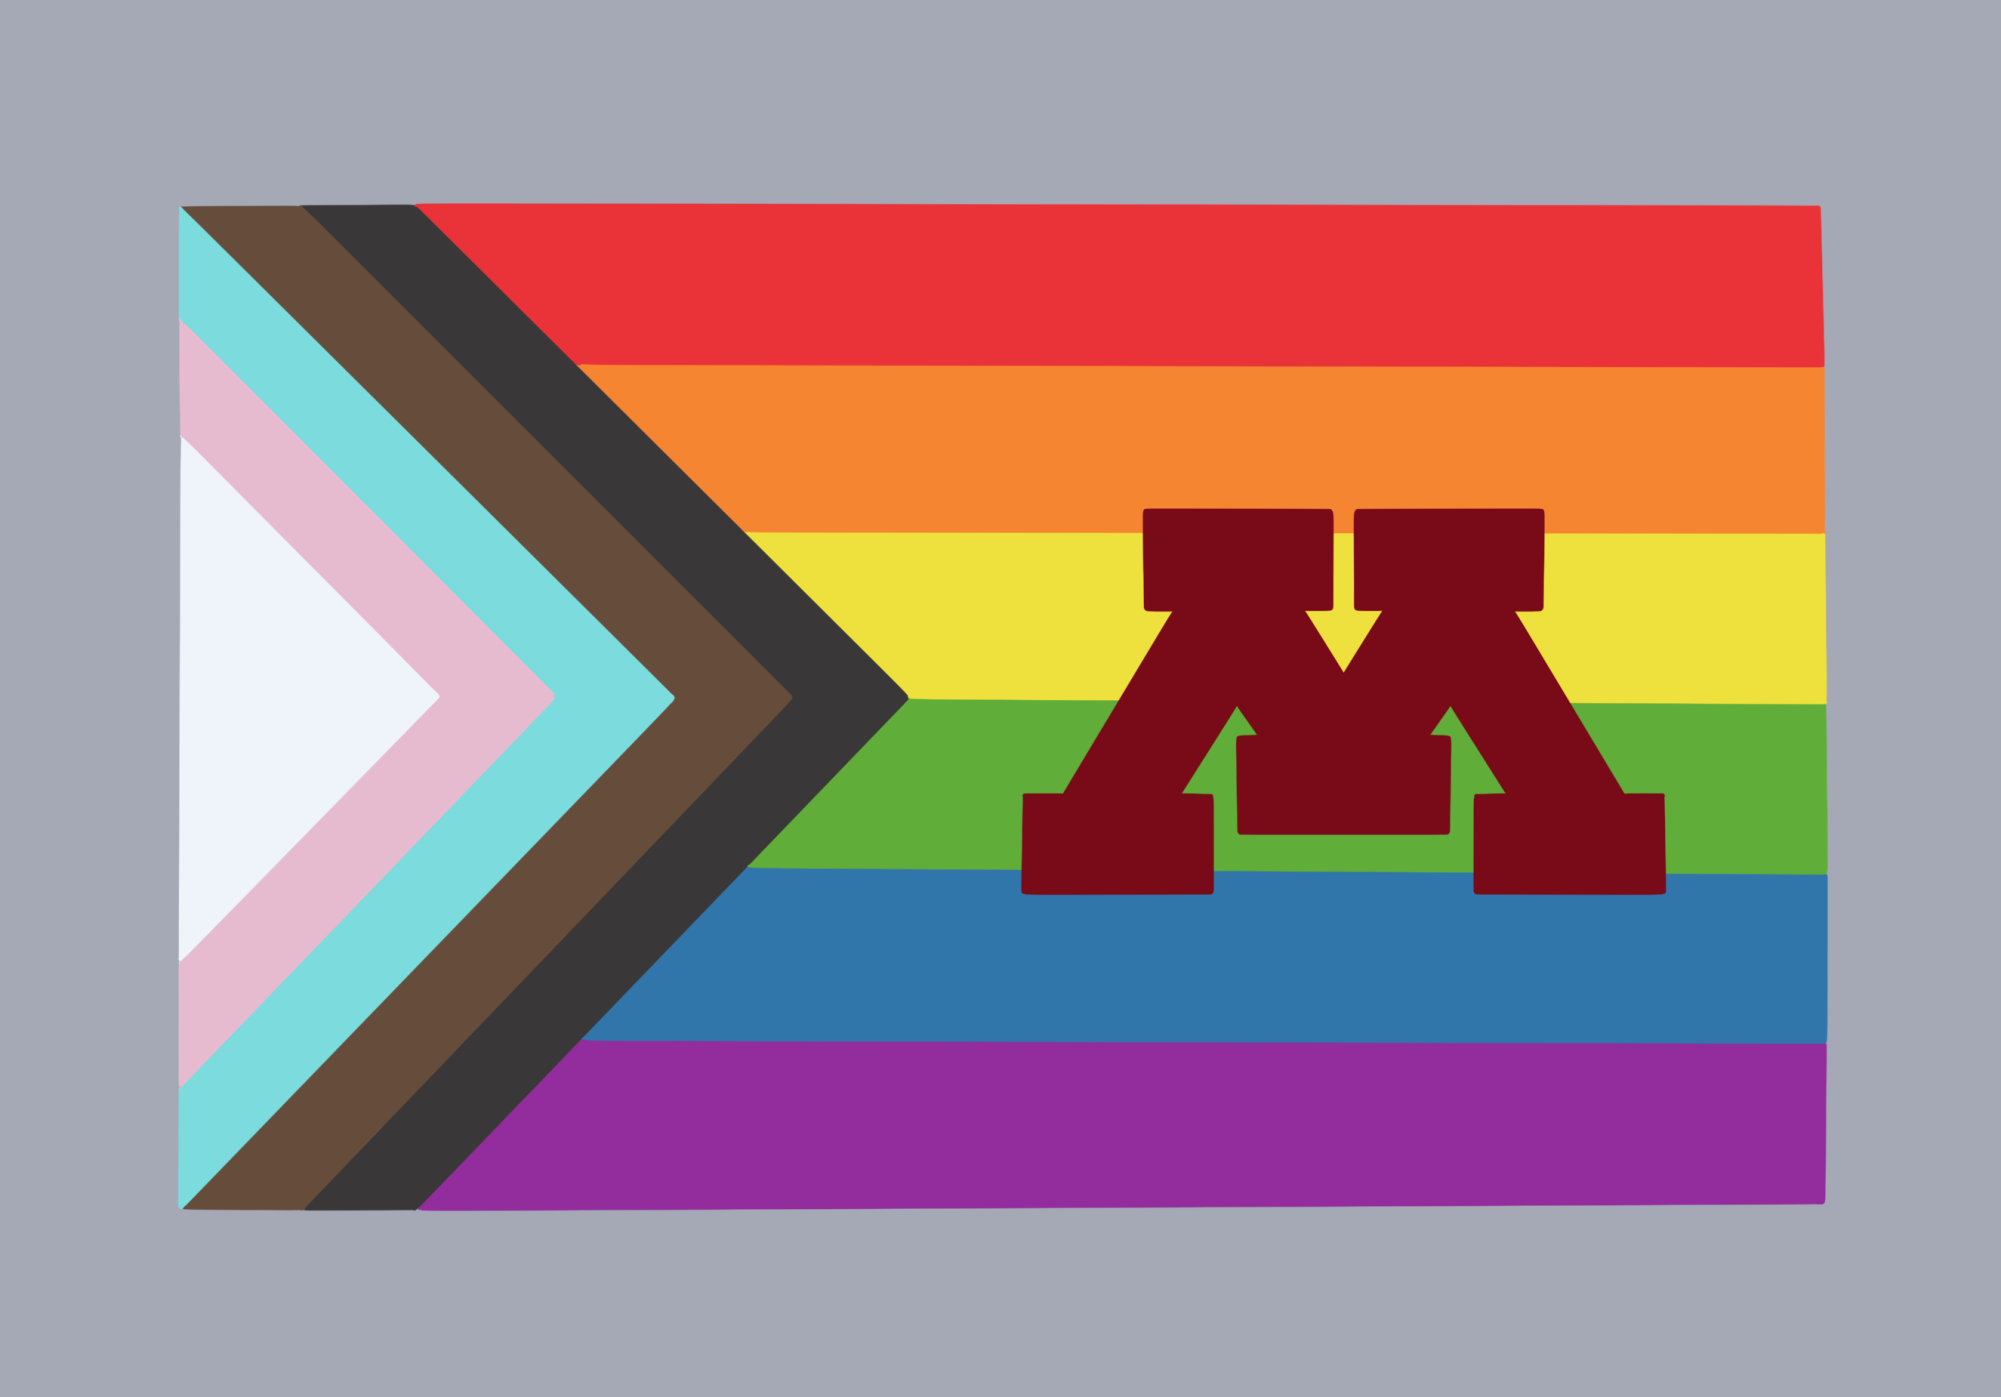 There are resources for LGBTQ+ students provided by the University year-round.